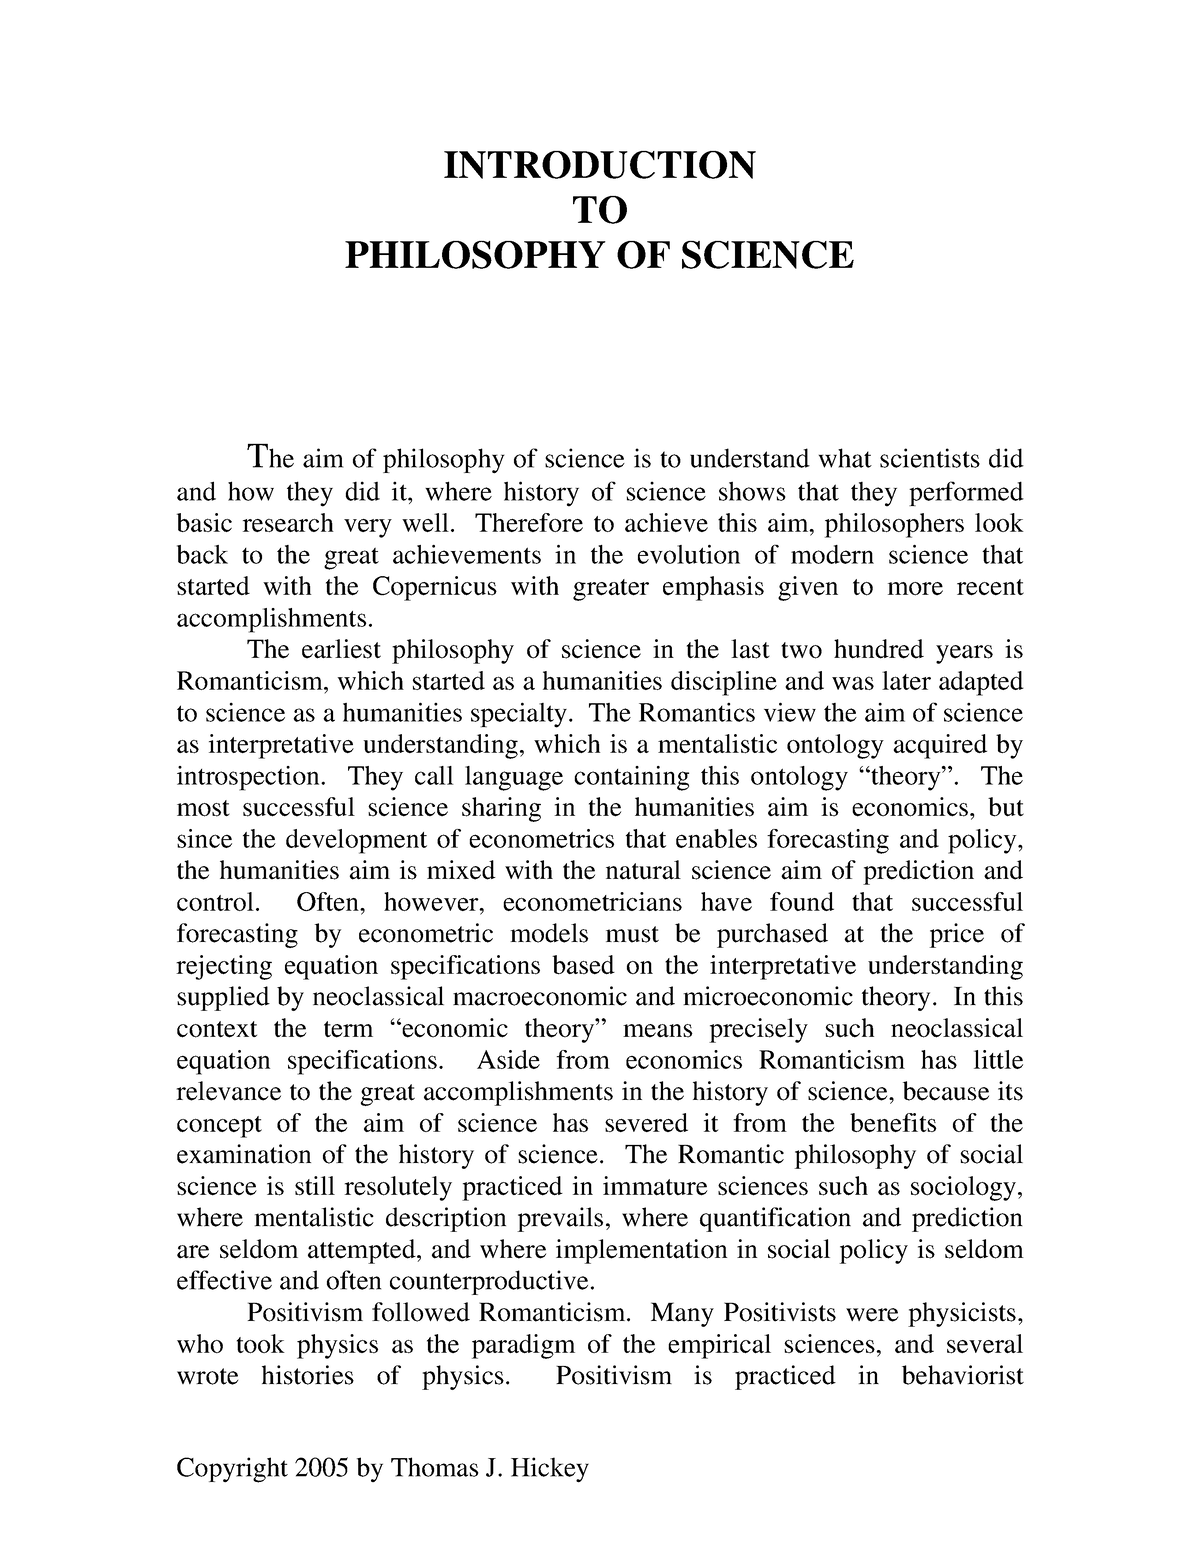 why science need philosophy essay